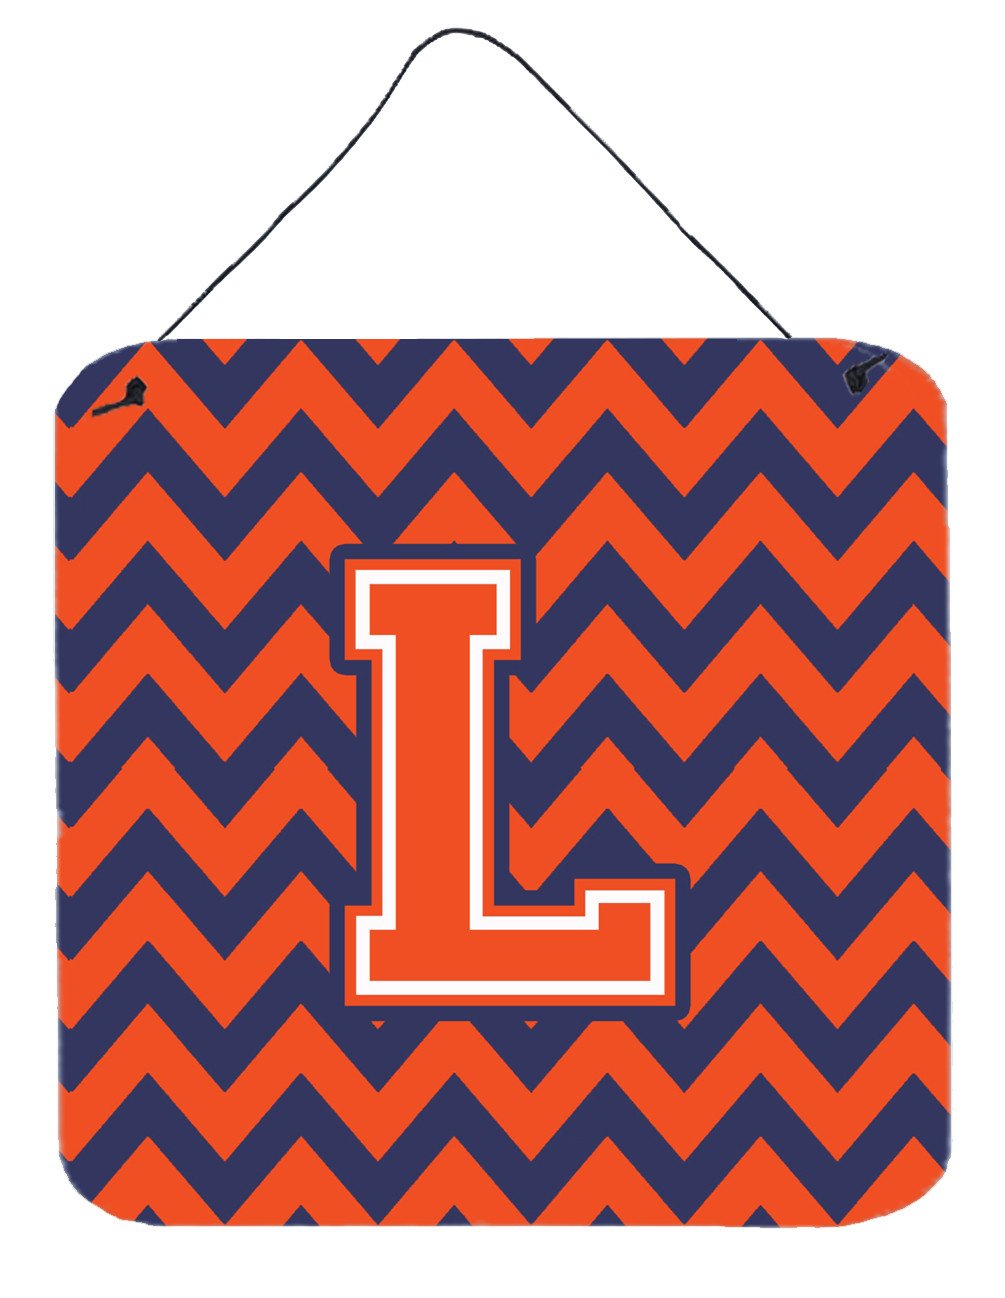 Letter L Chevron Orange and Blue Wall or Door Hanging Prints CJ1042-LDS66 by Caroline's Treasures